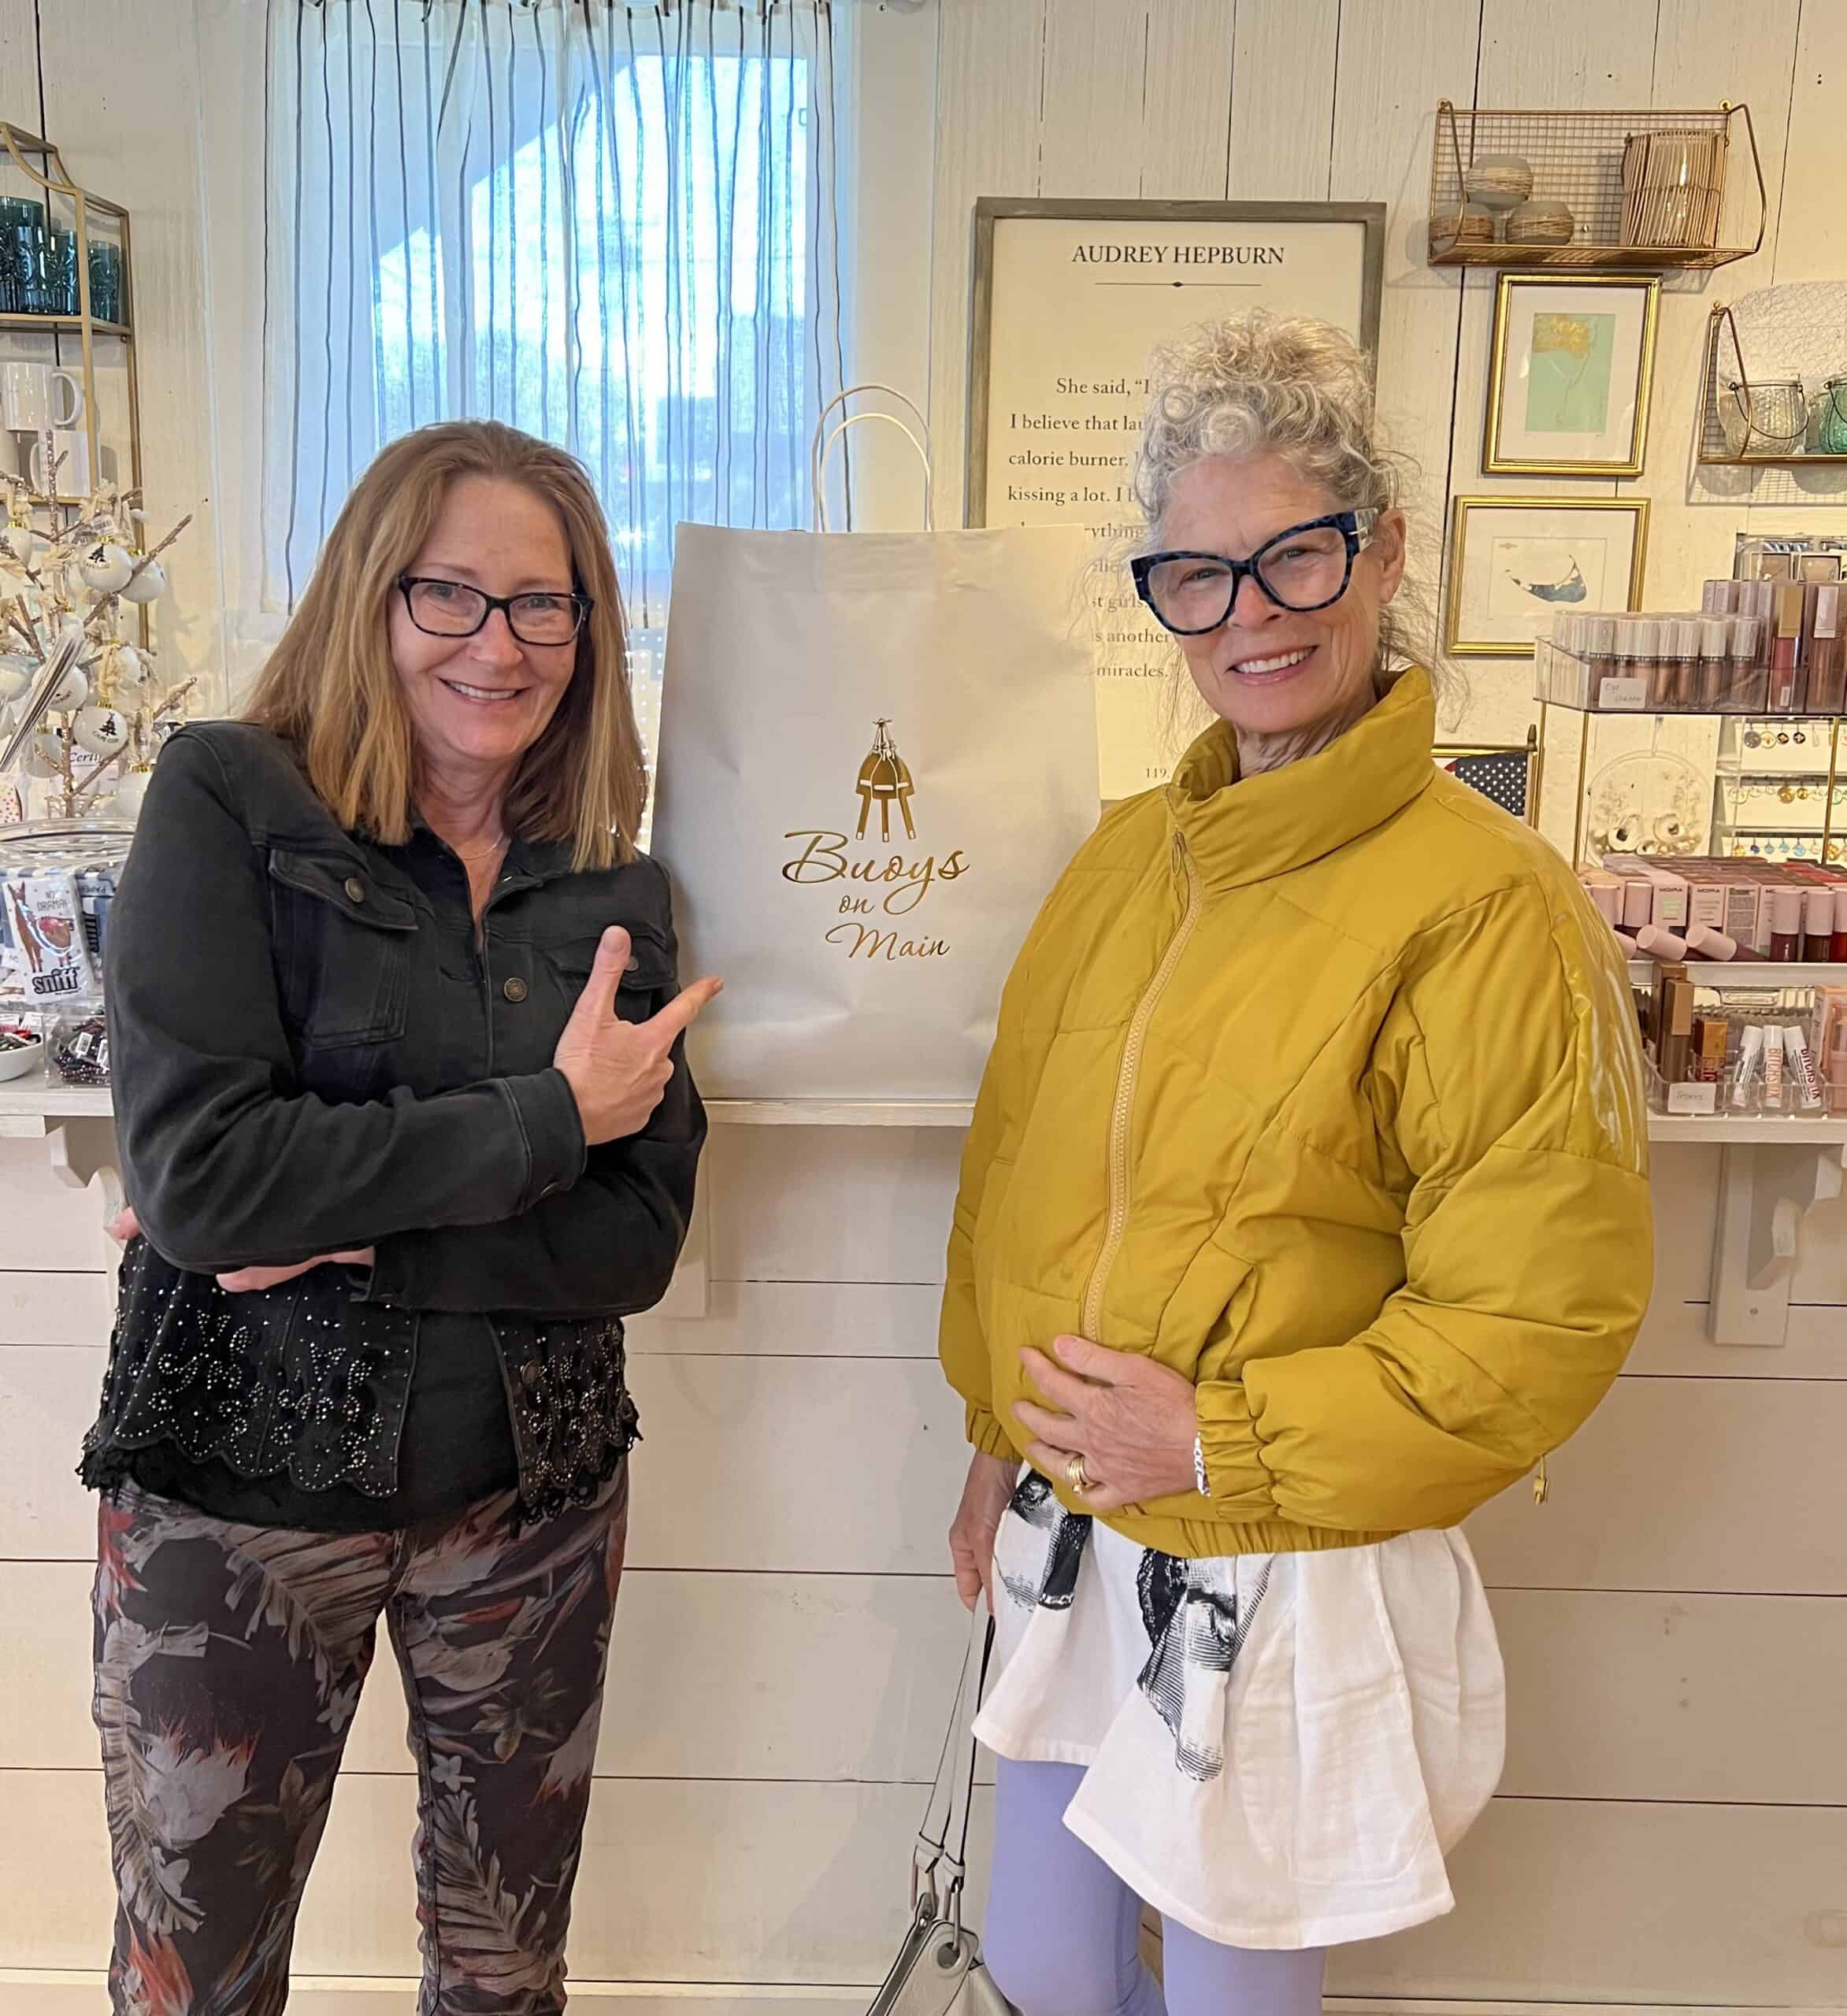 Two women in a store.  One is blond with red eye glasses and wearing a yellow puffy coat.  The other is wearing black eye glasses, a black bejeweled jacket and is pointing at a white shopping bag.